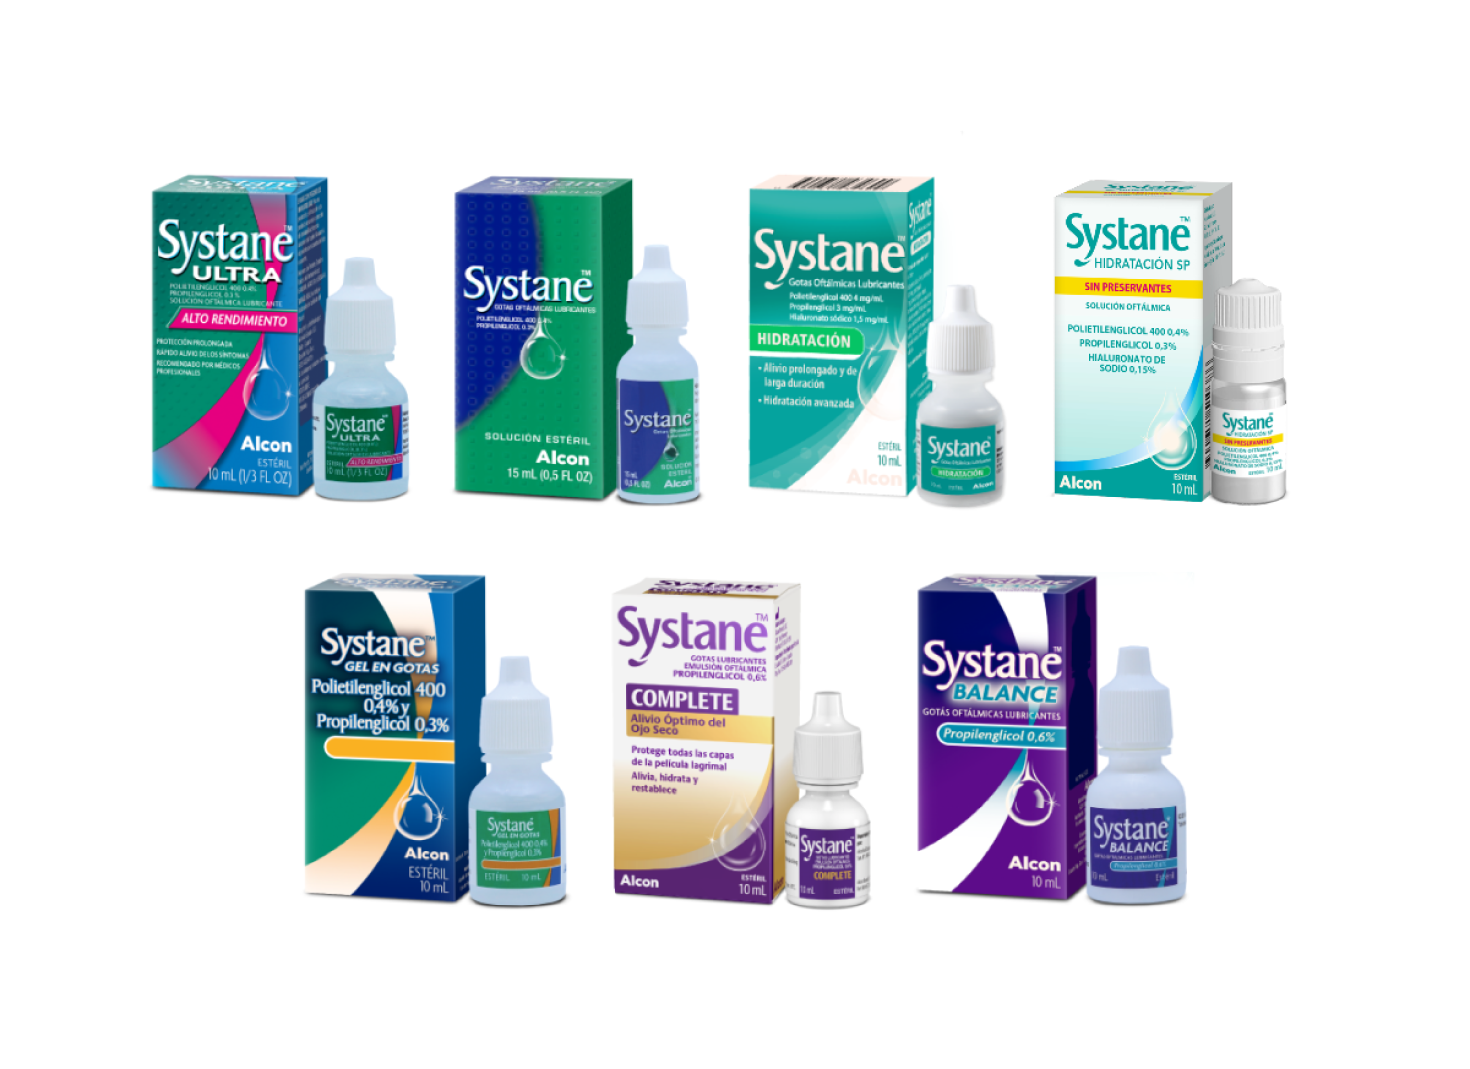 Systane products